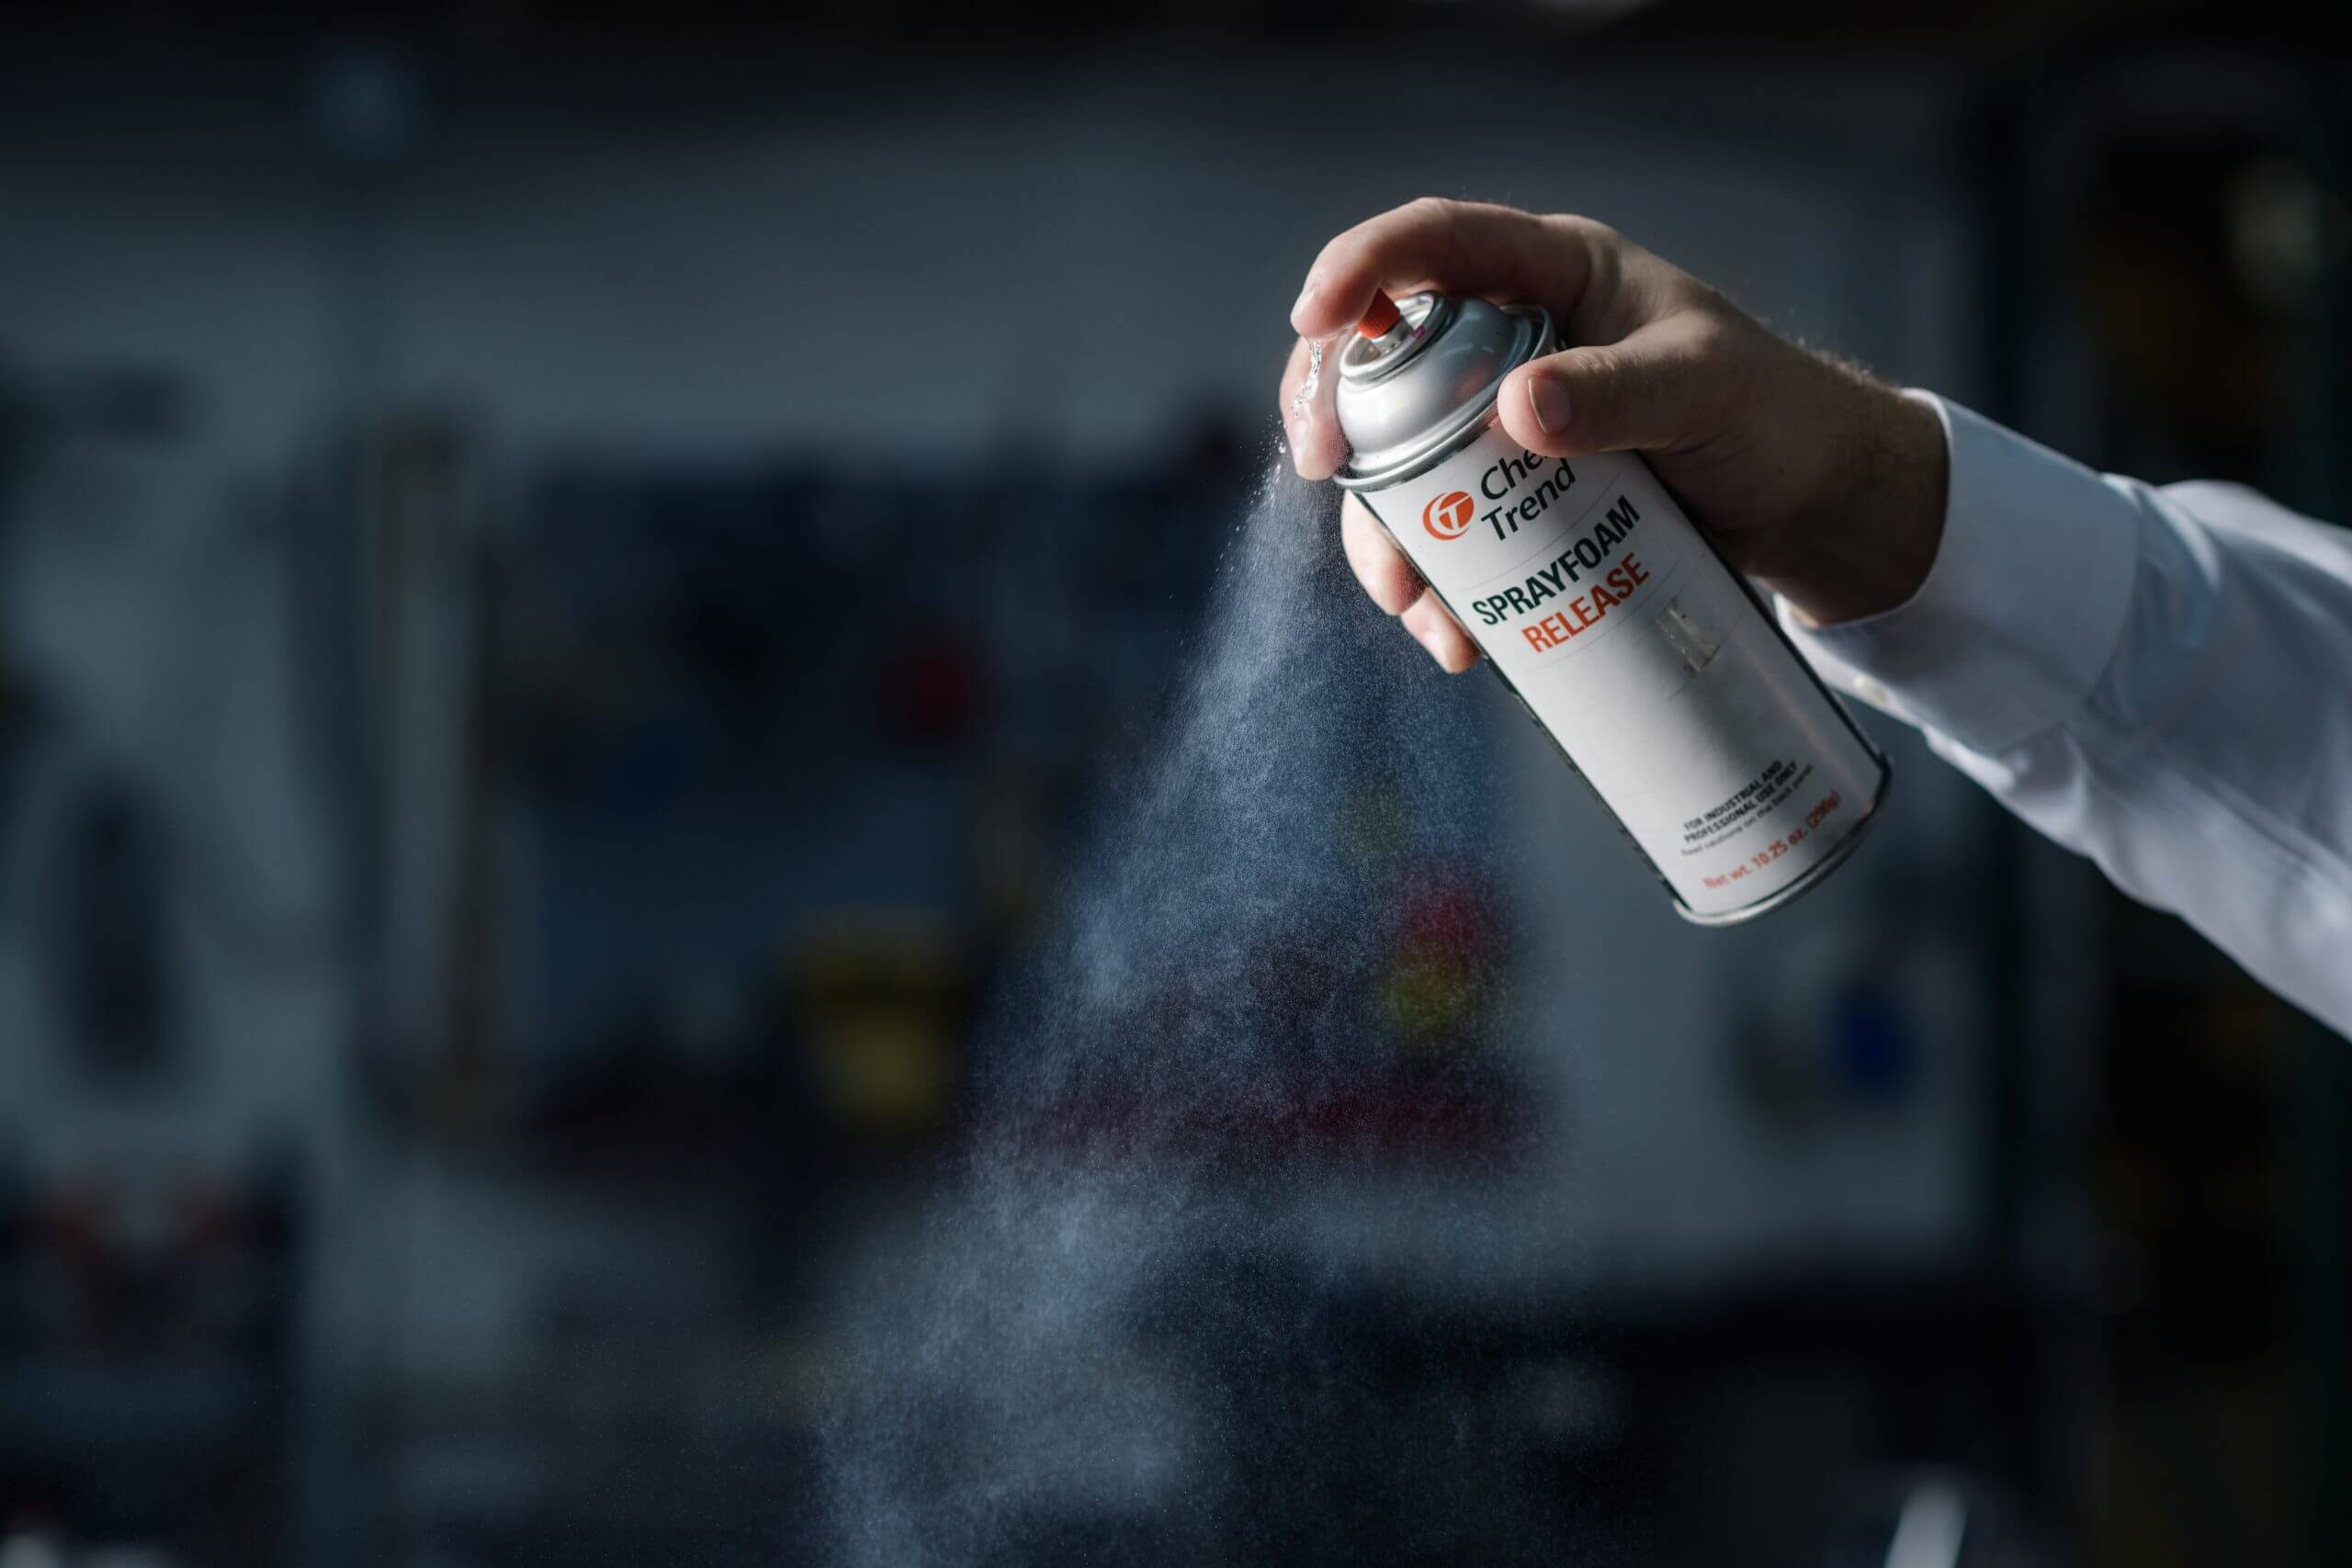 A hand spraying Chem-Trend Spray Foam Silicone from a canister.